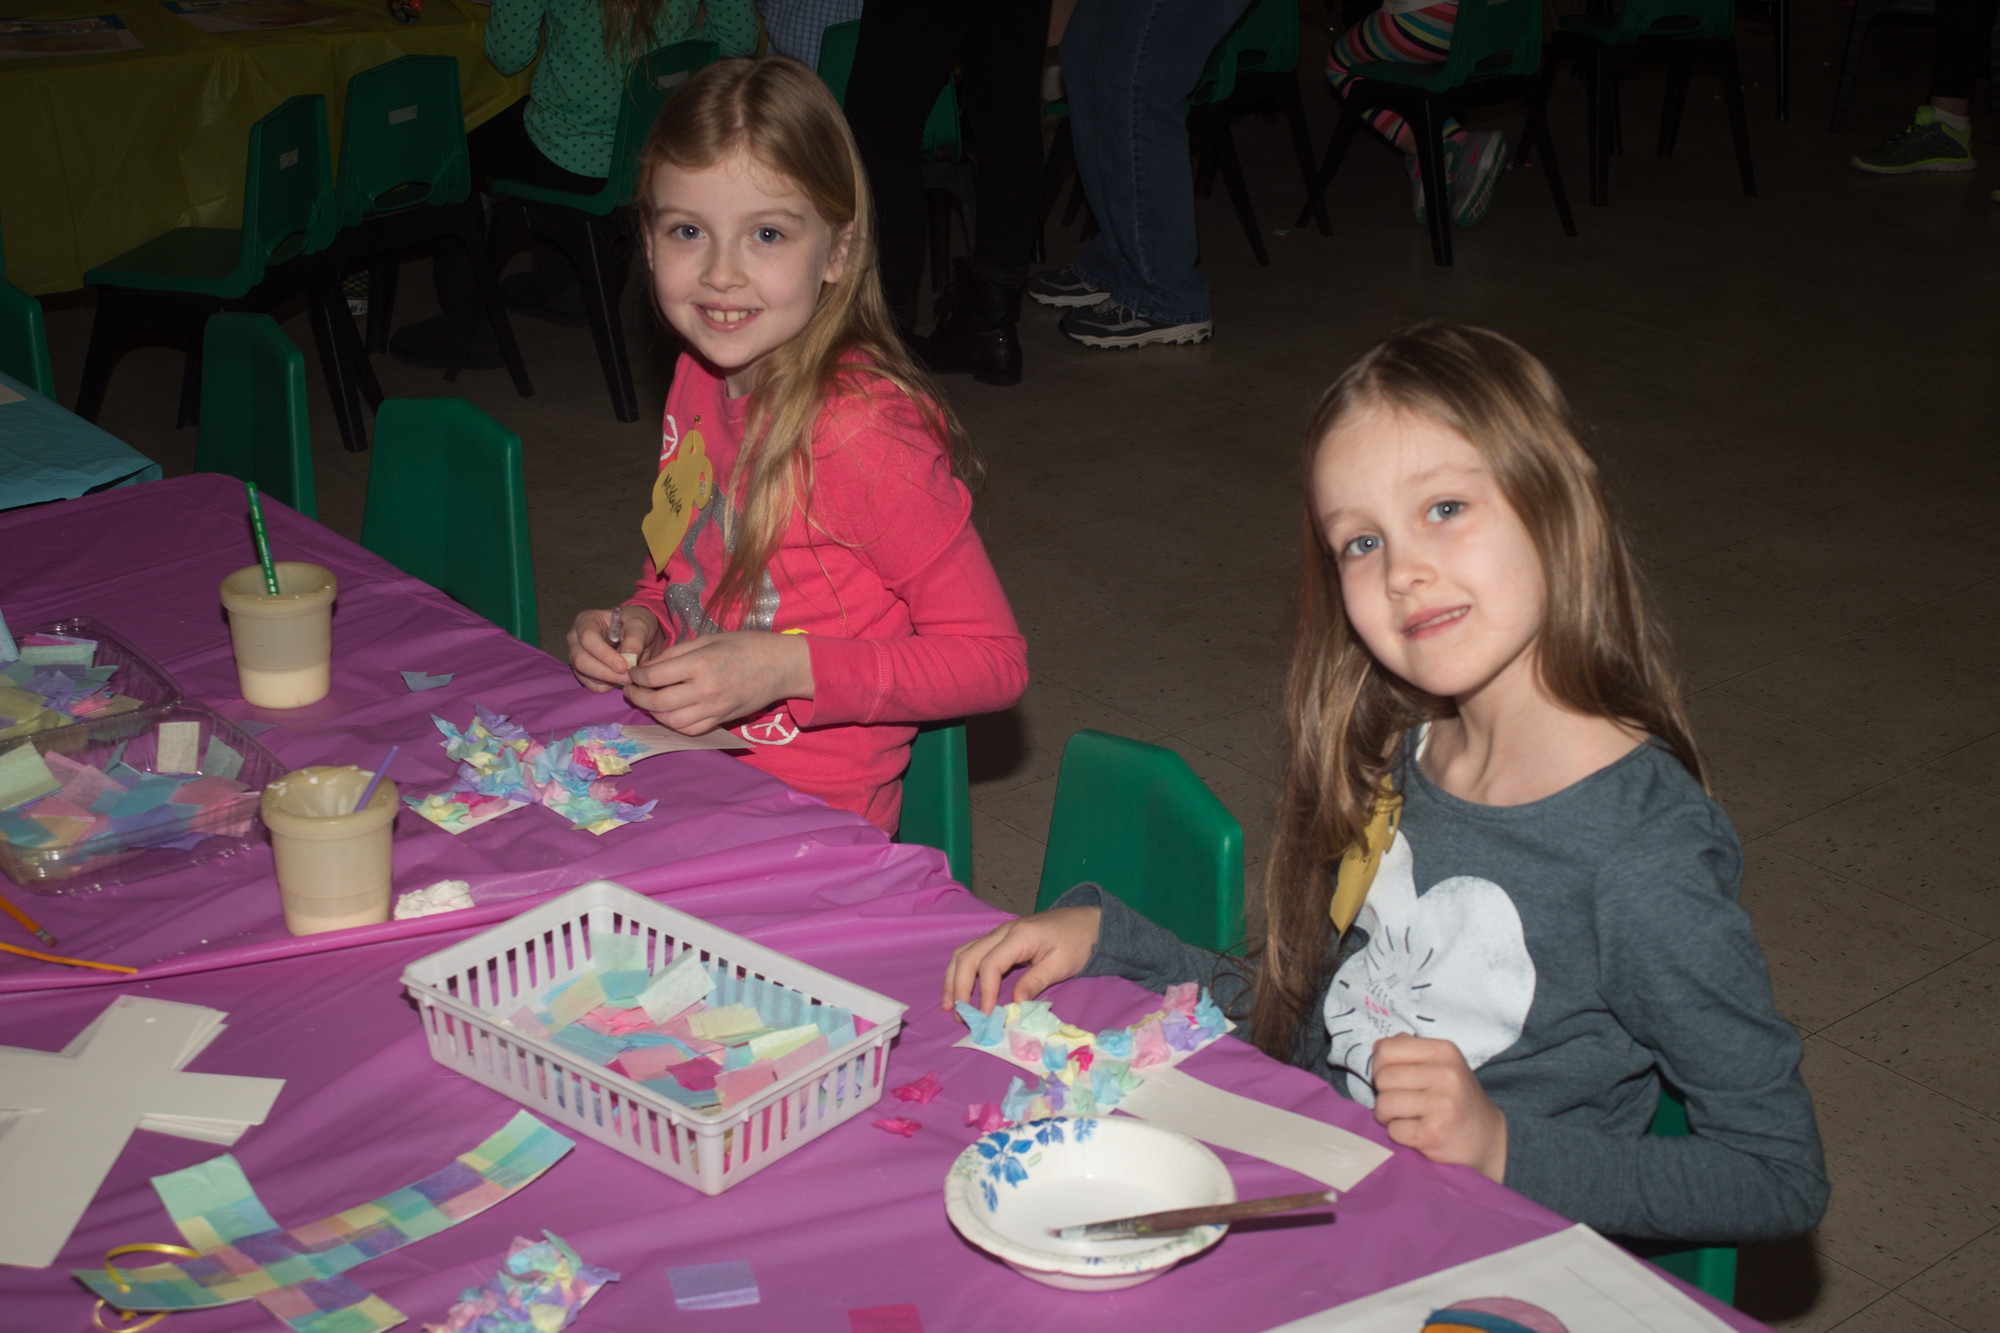 At the Easter party, Mckayla, 9, and Haily, 7, decorated crosses.